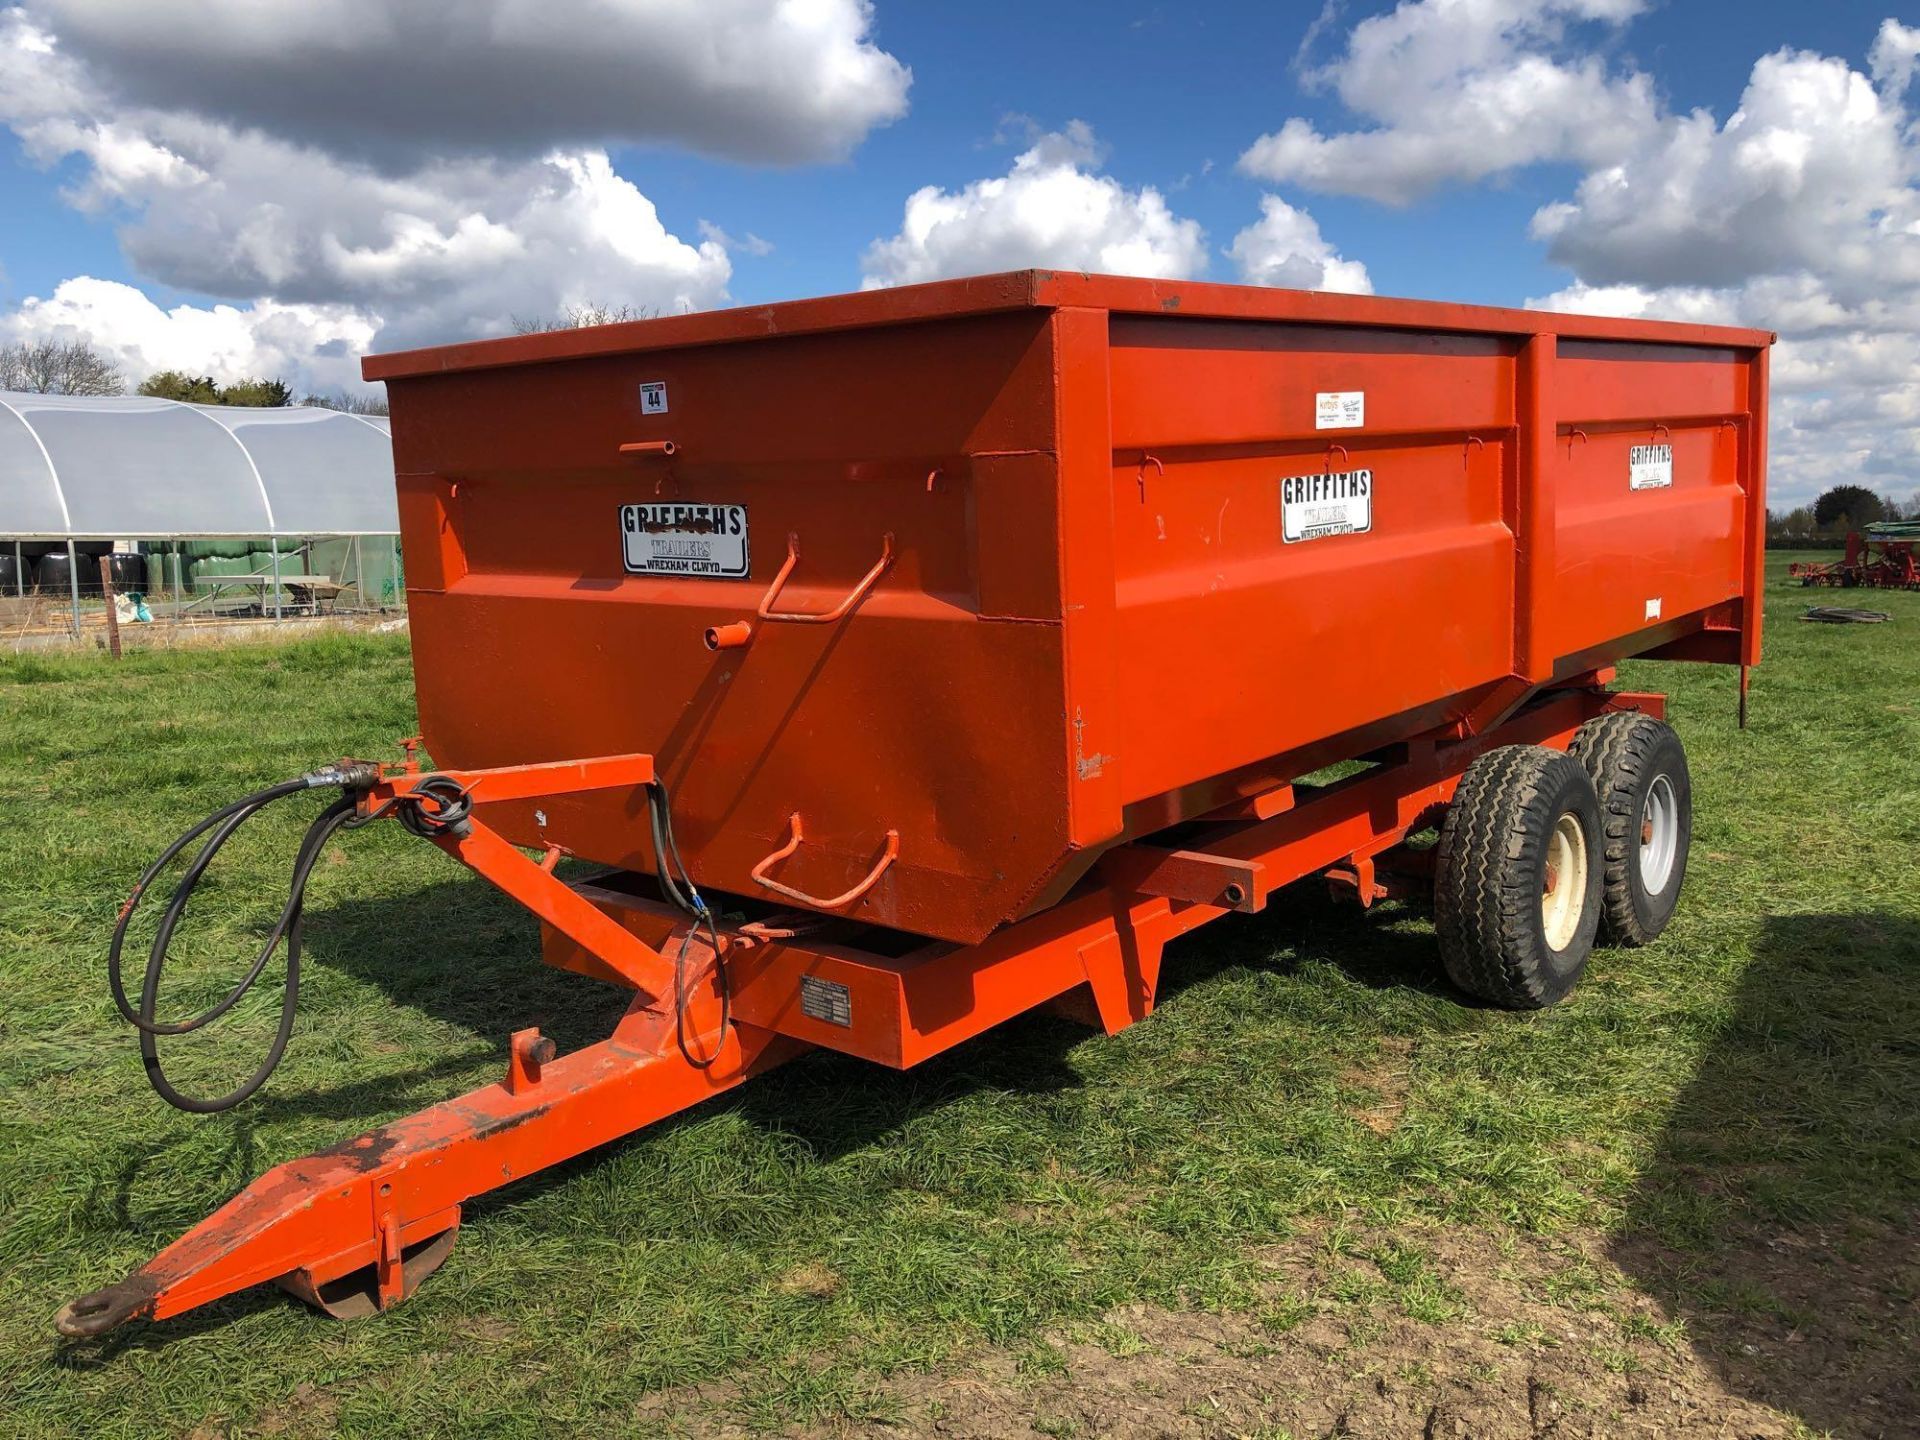 1984 Griffiths GT80 10t twin axle hydraulic tipping grain trailer with manual tailgate and grain chu